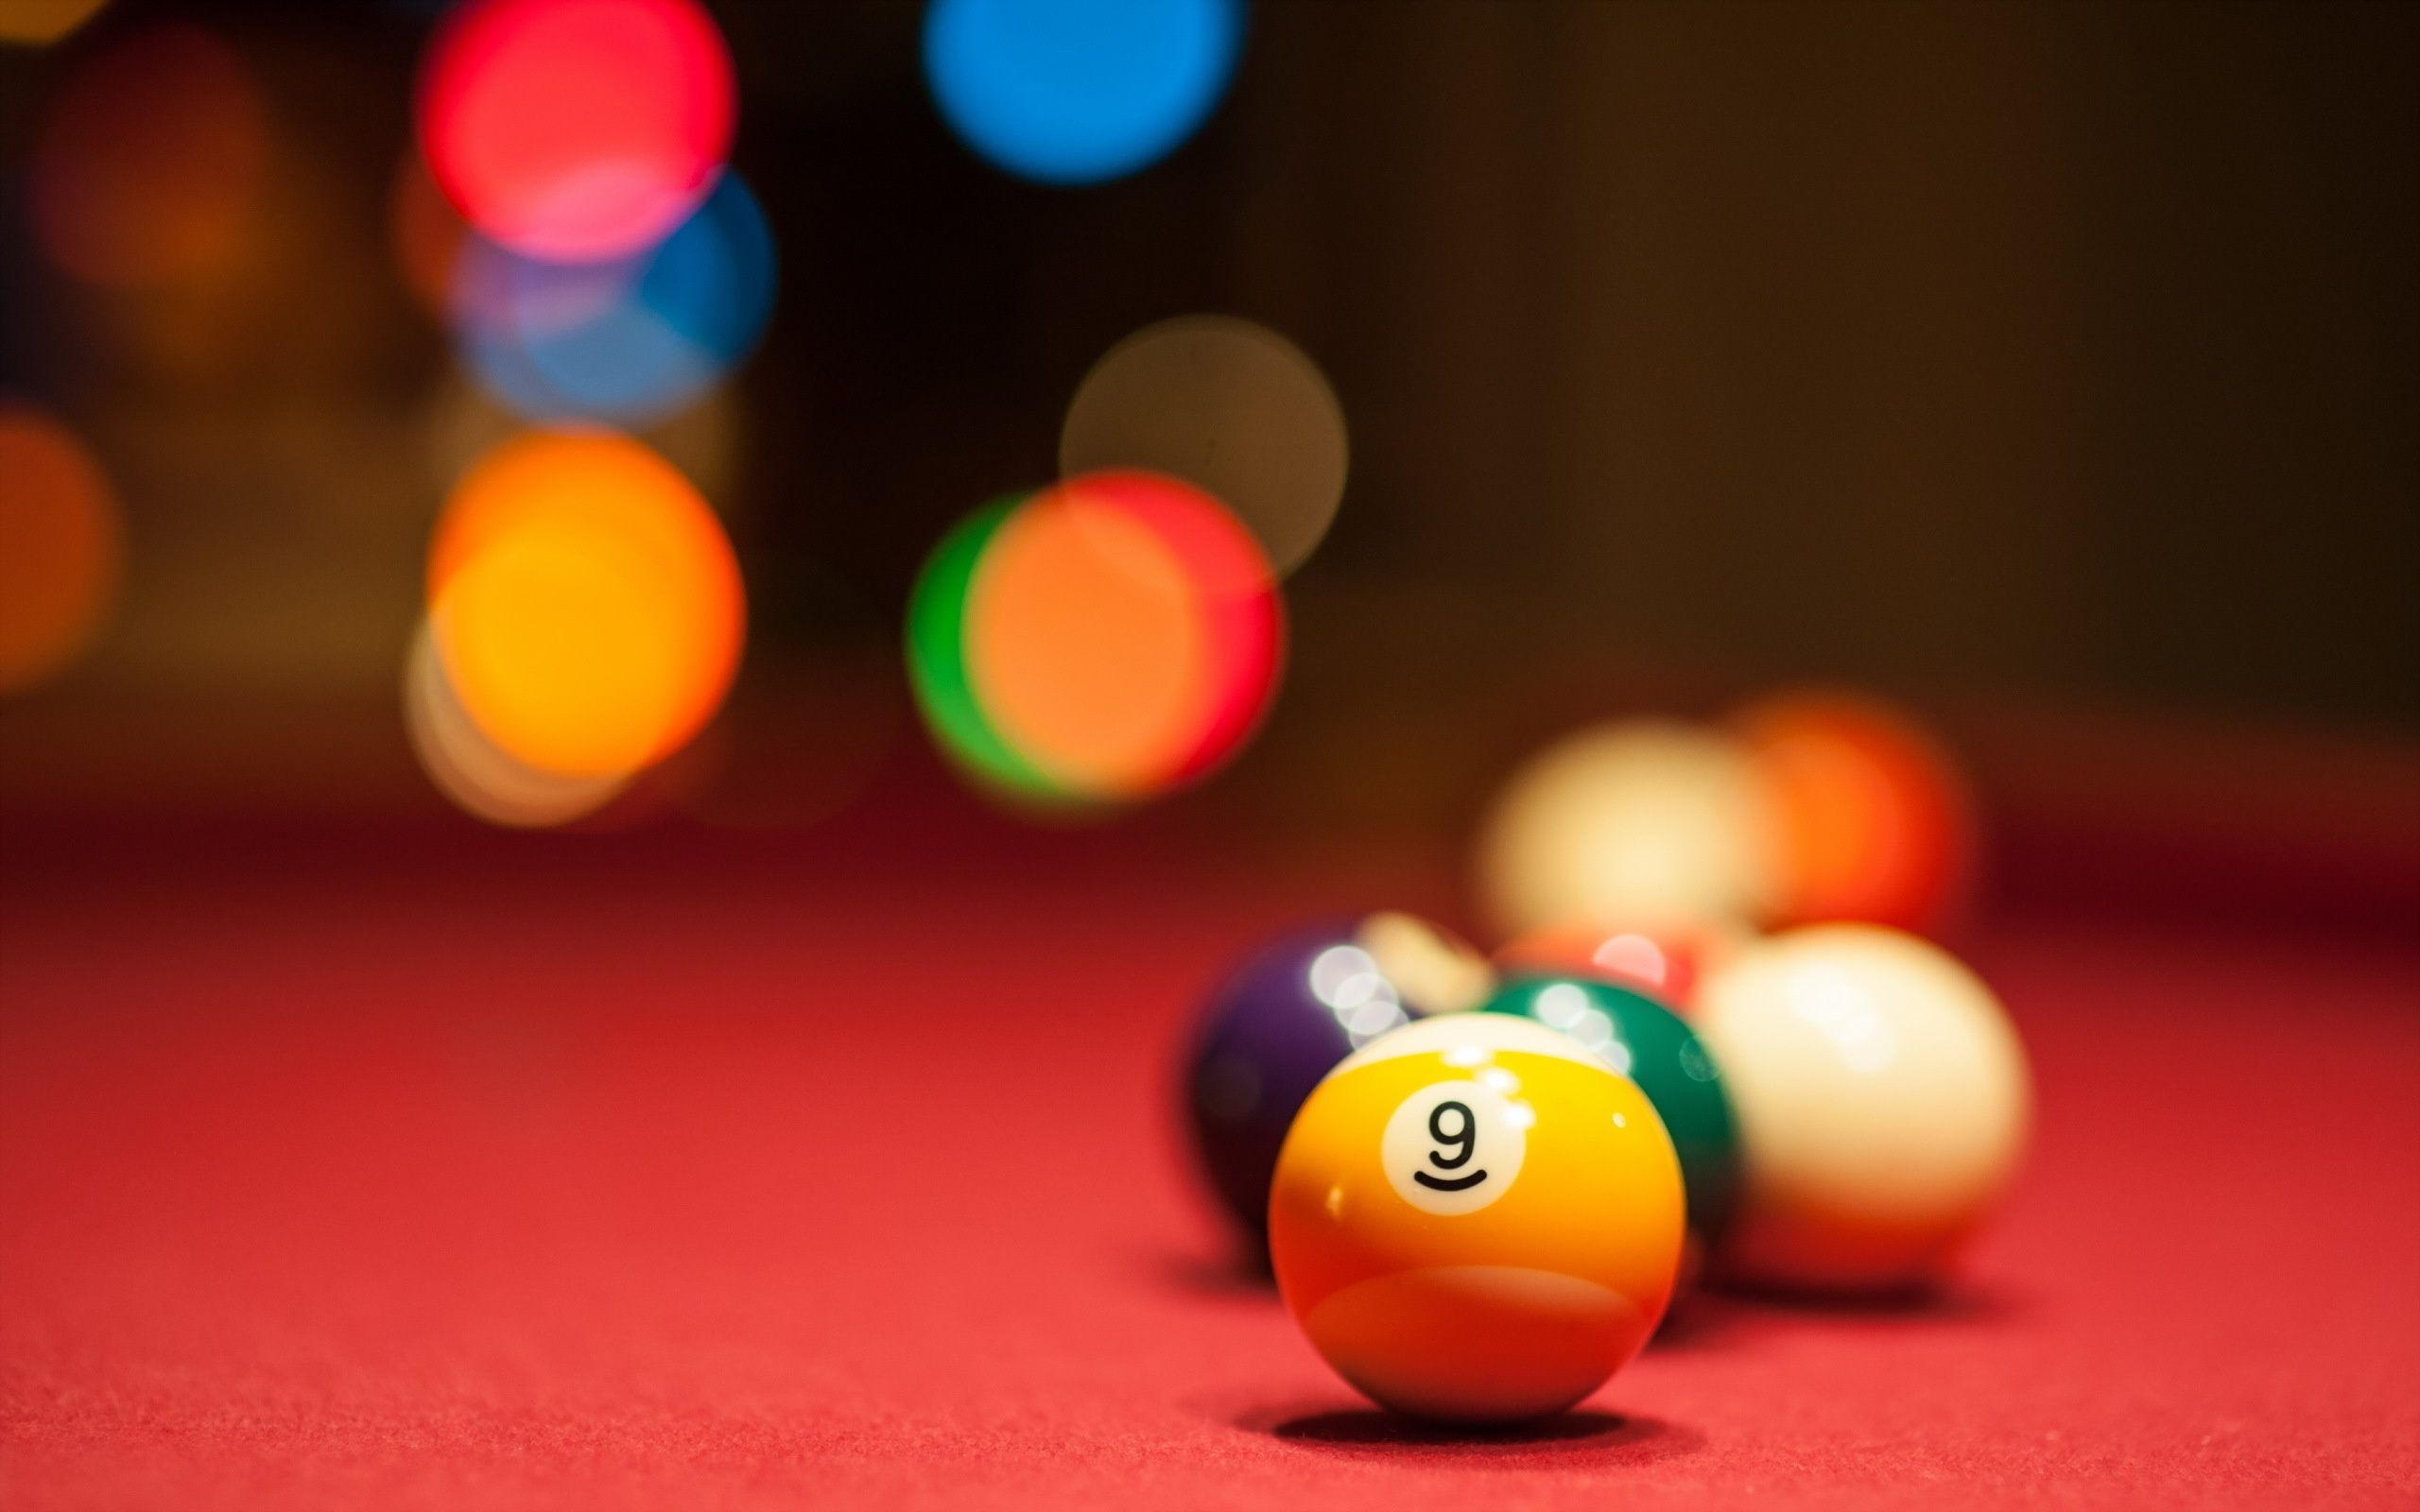 Pool (Cue Sports): Object balls after a break shot, Competitive sport and recreational activity. 2560x1600 HD Background.